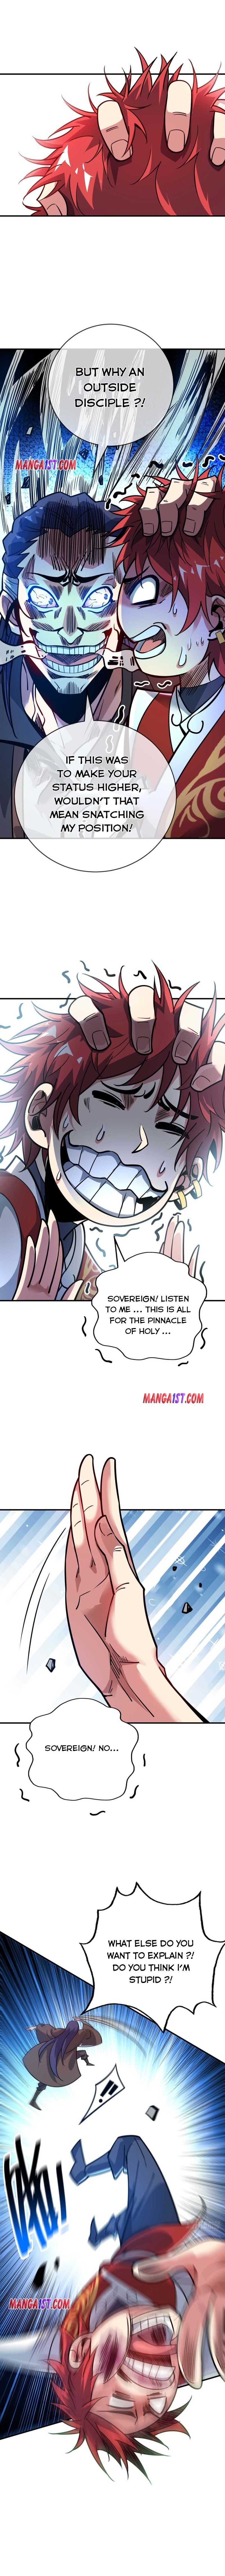 The First Son-In-Law Vanguard of All Time Chapter 119 page 3